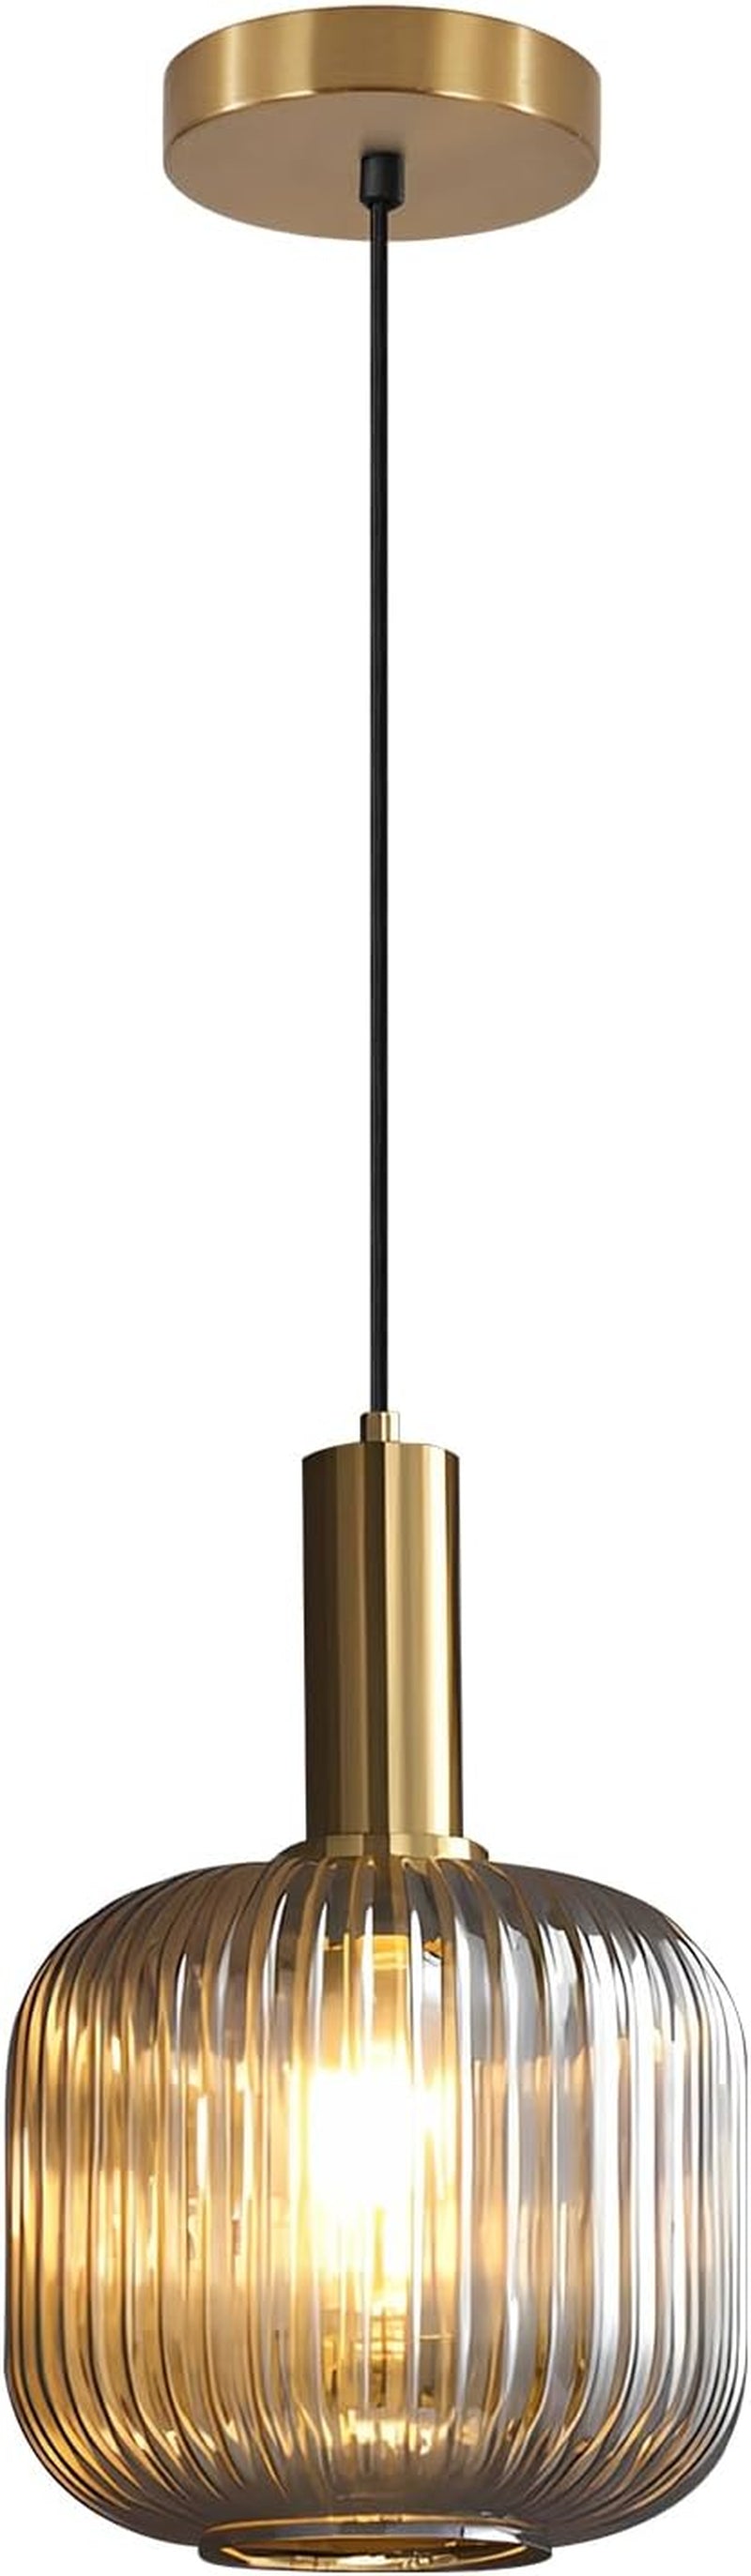 BOKT Green 3-Light Cluster Pendant Lights Mid Century Modern Ceiling Hanging Lighting 7.9" Farmhouse Gold Pendant Lights Kitchen Island with Ribbed Hand Blown Glass for Living Room Dining Room